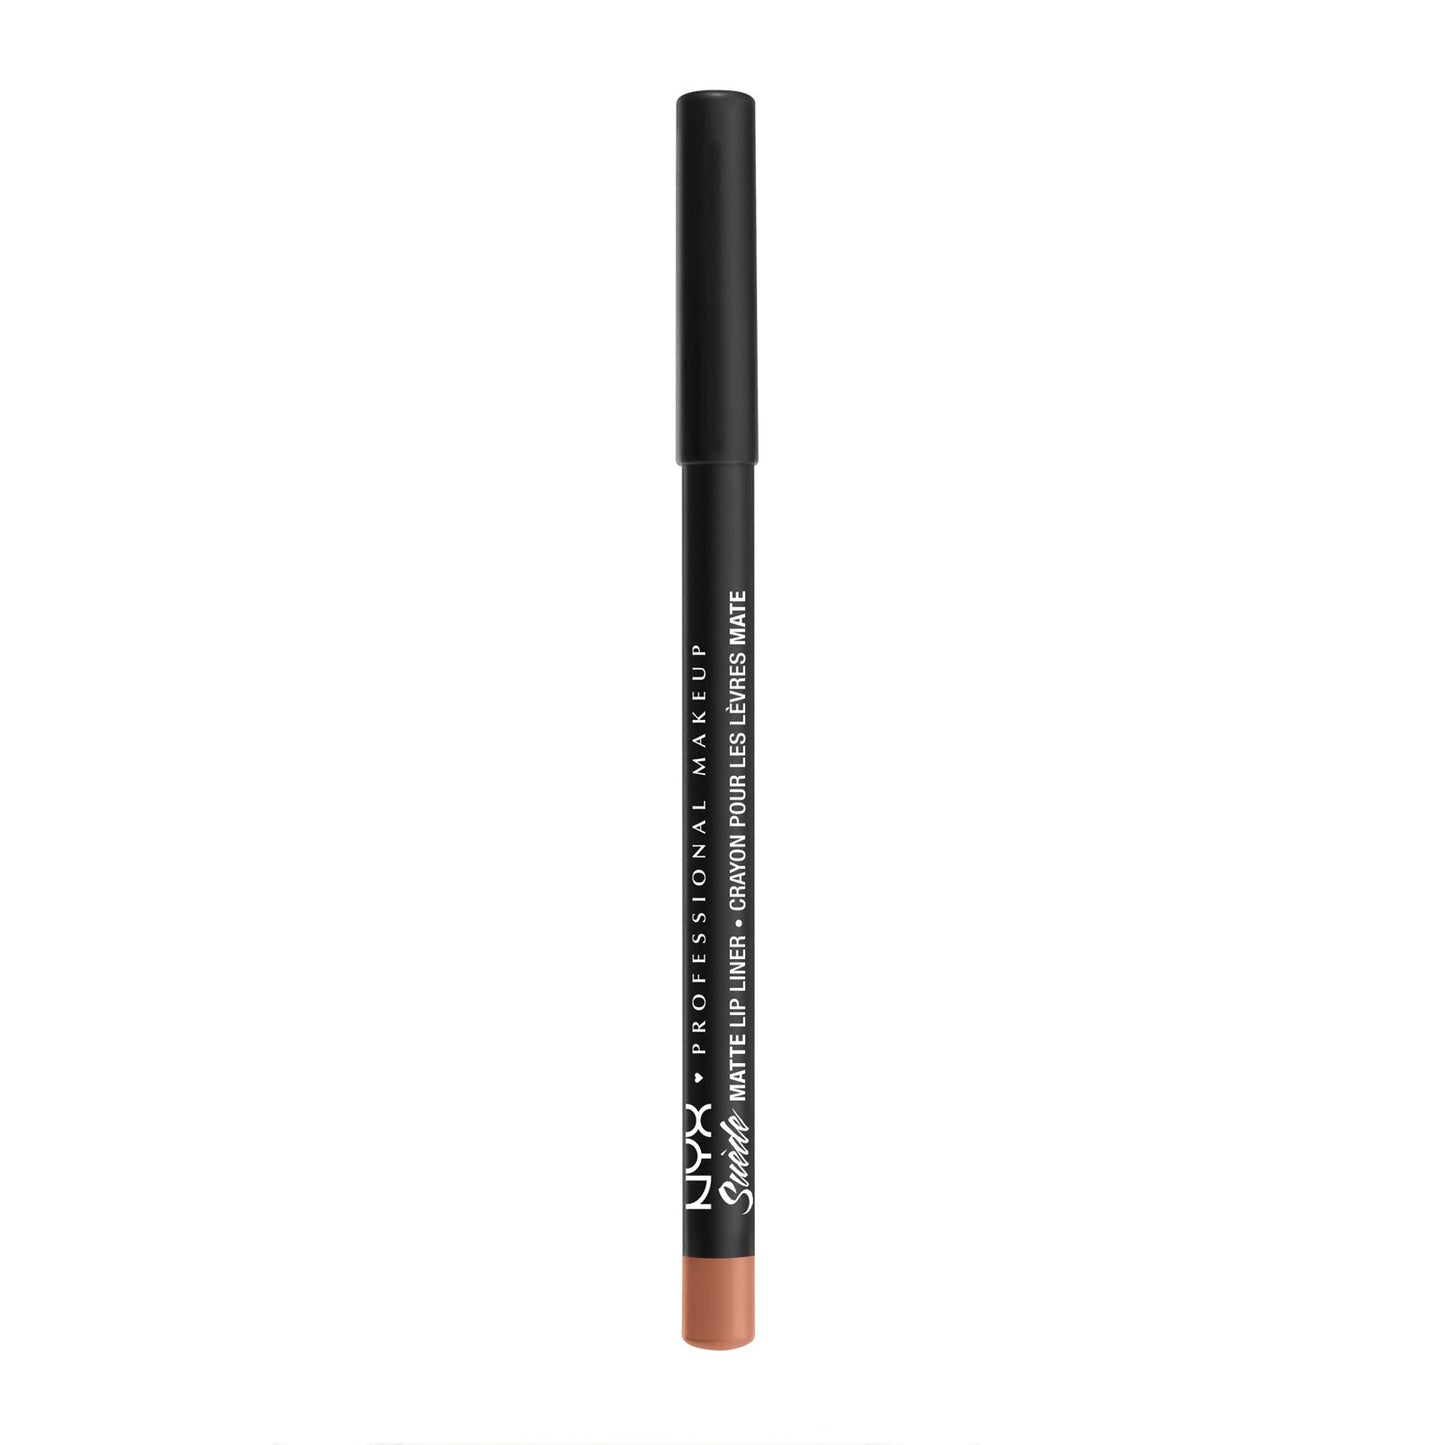 Nyx Suede Matte Lip Liner Pencil SMLL49 Fetish 1g  oh-so-pretty lip liners were literally made to match those powdery-matte lippies. Every velvety shade goes on smoothly and provides a perfect matte base.